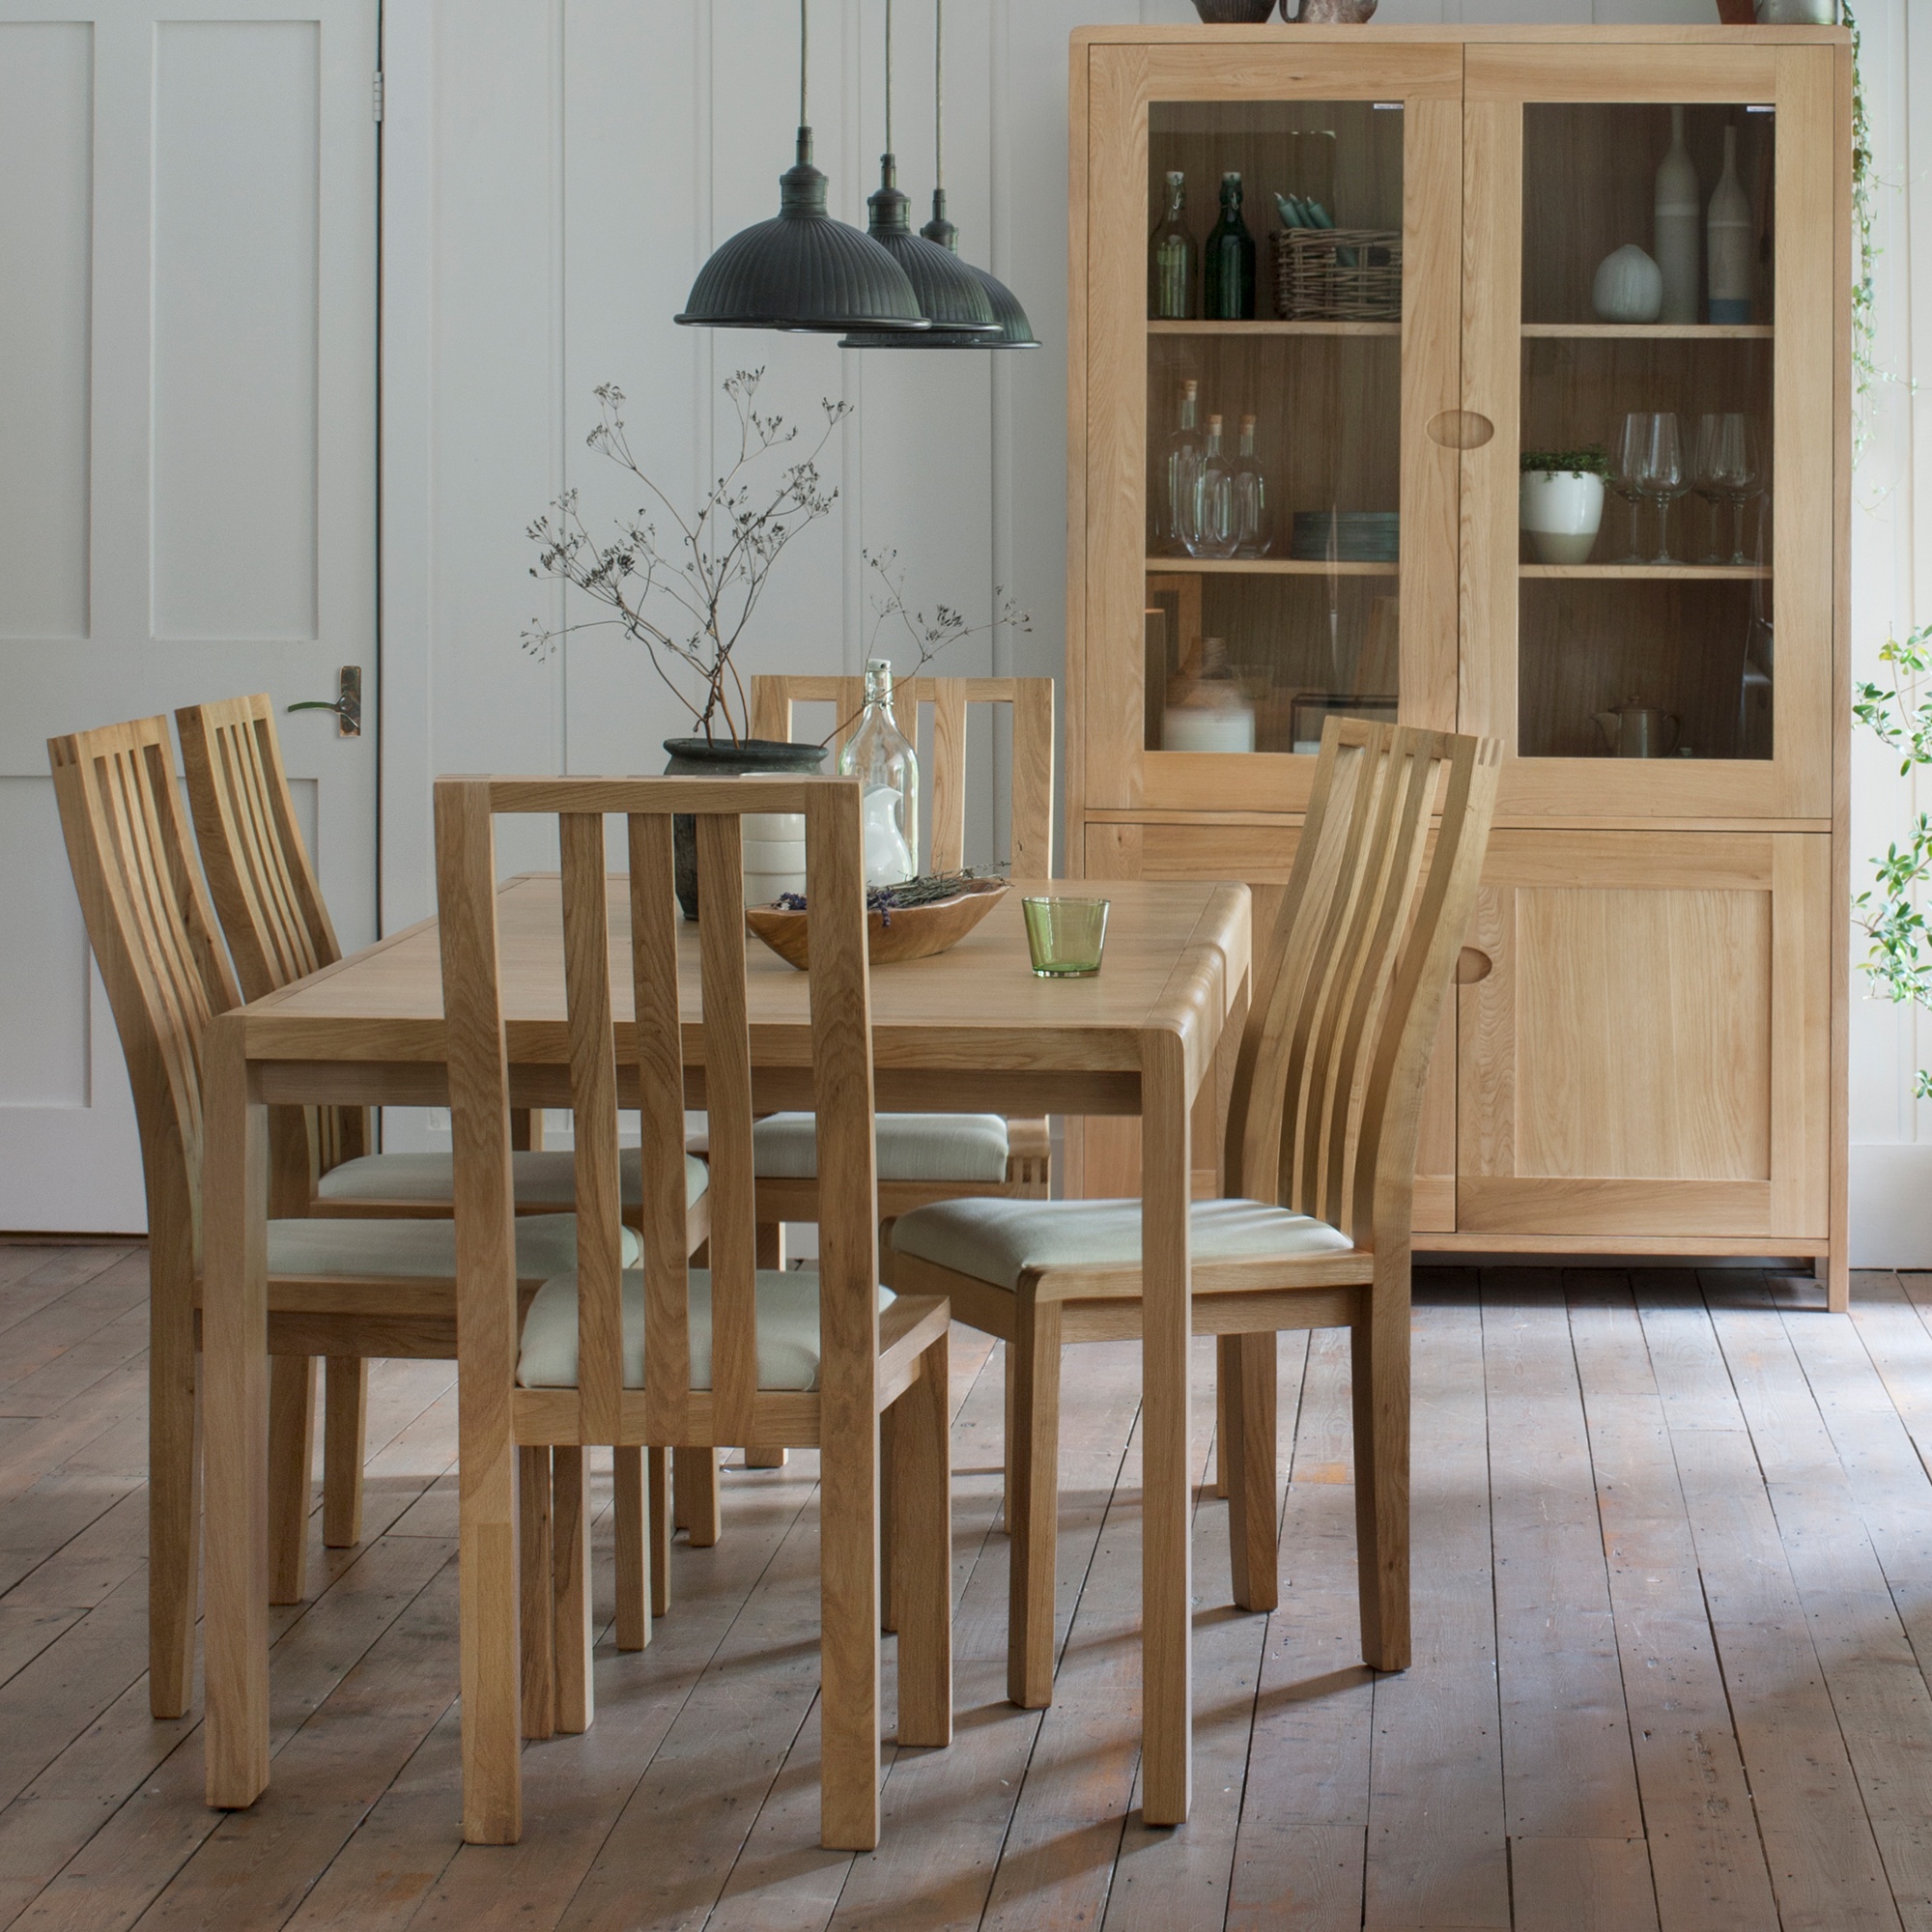 BOSCO - DINING Ercol Bosco Small Extending Dining Table | Dining Tables